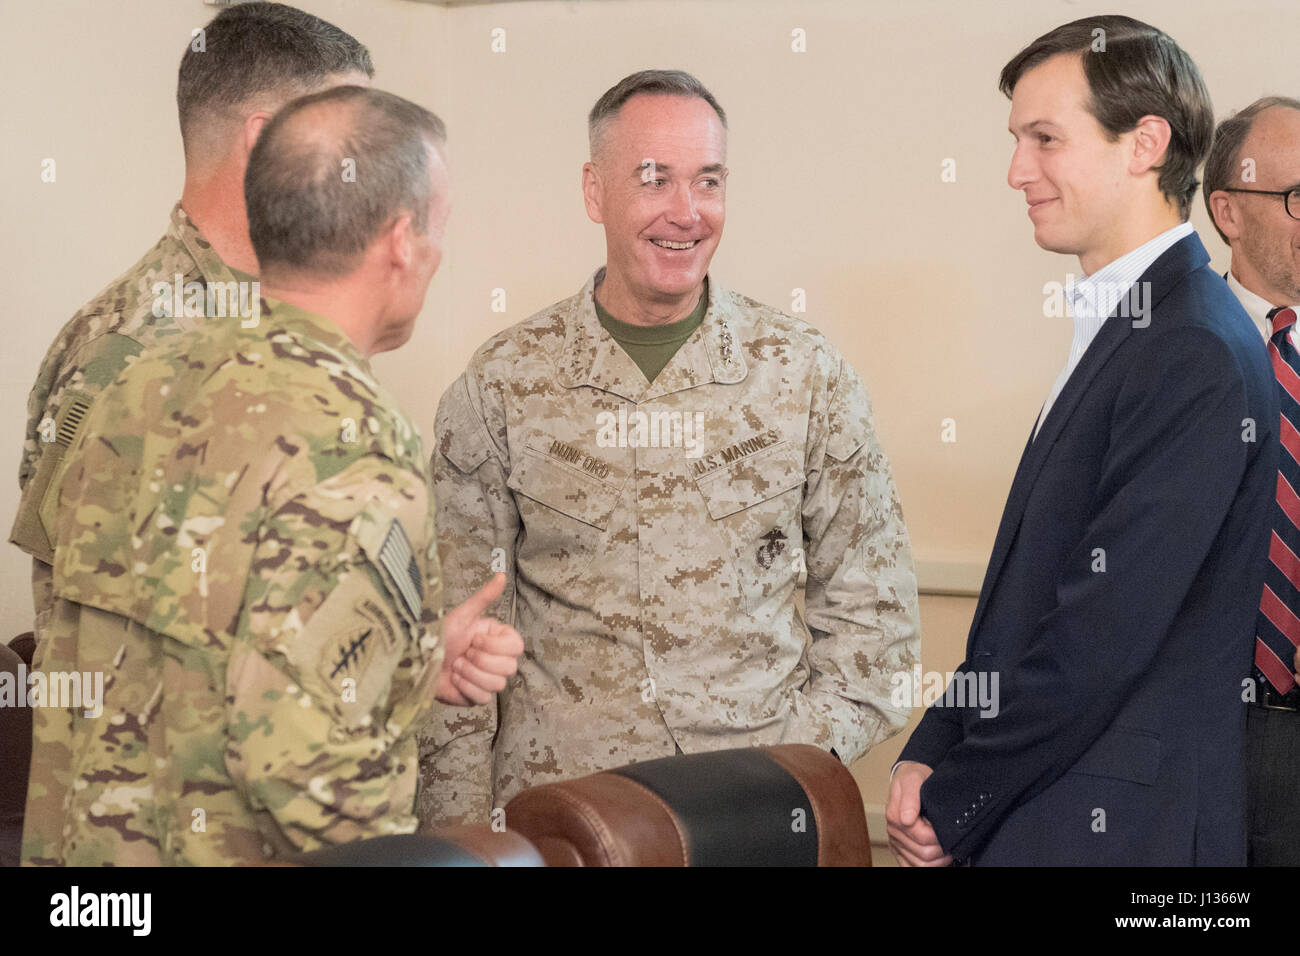 Marine Corps Gen. Joseph F. Dunford Jr., chairman of the Joint Chiefs of Staff, Jared Kushner, Senior Advisor to President Donald J. Trump,Tom Bossert, the president’s homeland security advisor, and Douglas A. Silliman, U.S. Ambassador to the Republic of Iraq, meet with Lt. Gen. Stephen J. Townsend, commander, Combined Joint Task Force – Operation Inherent Resolve, at CJTOFOIR headquarters at Union III in Baghdad, Iraq, April 4, 2017. DoD Photo by Navy Petty Officer 2nd Class Dominique A. Pineiro Stock Photo